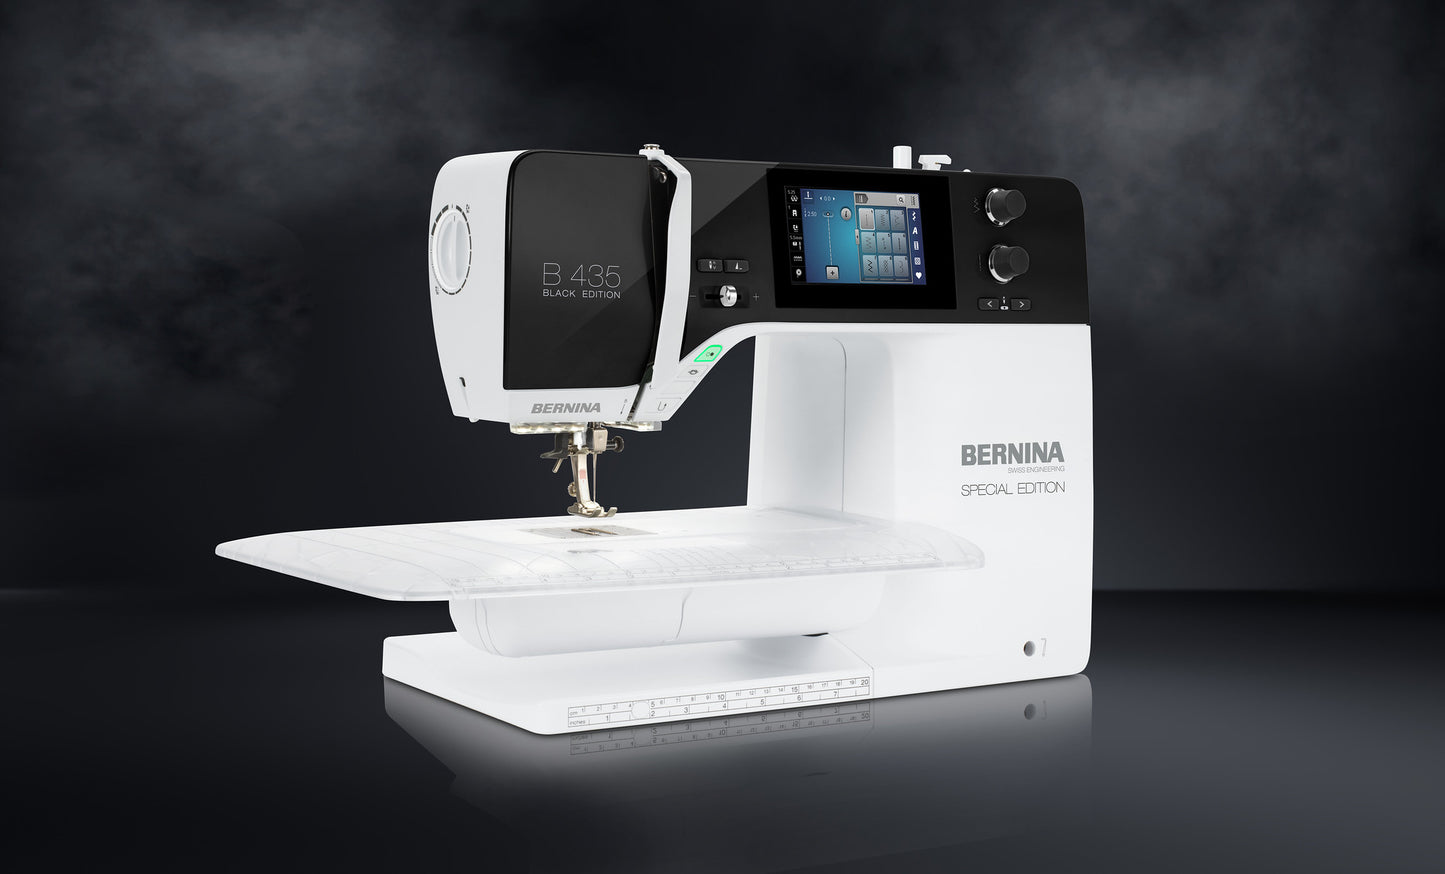 Bernina Special Edition 435 - Now in Stock